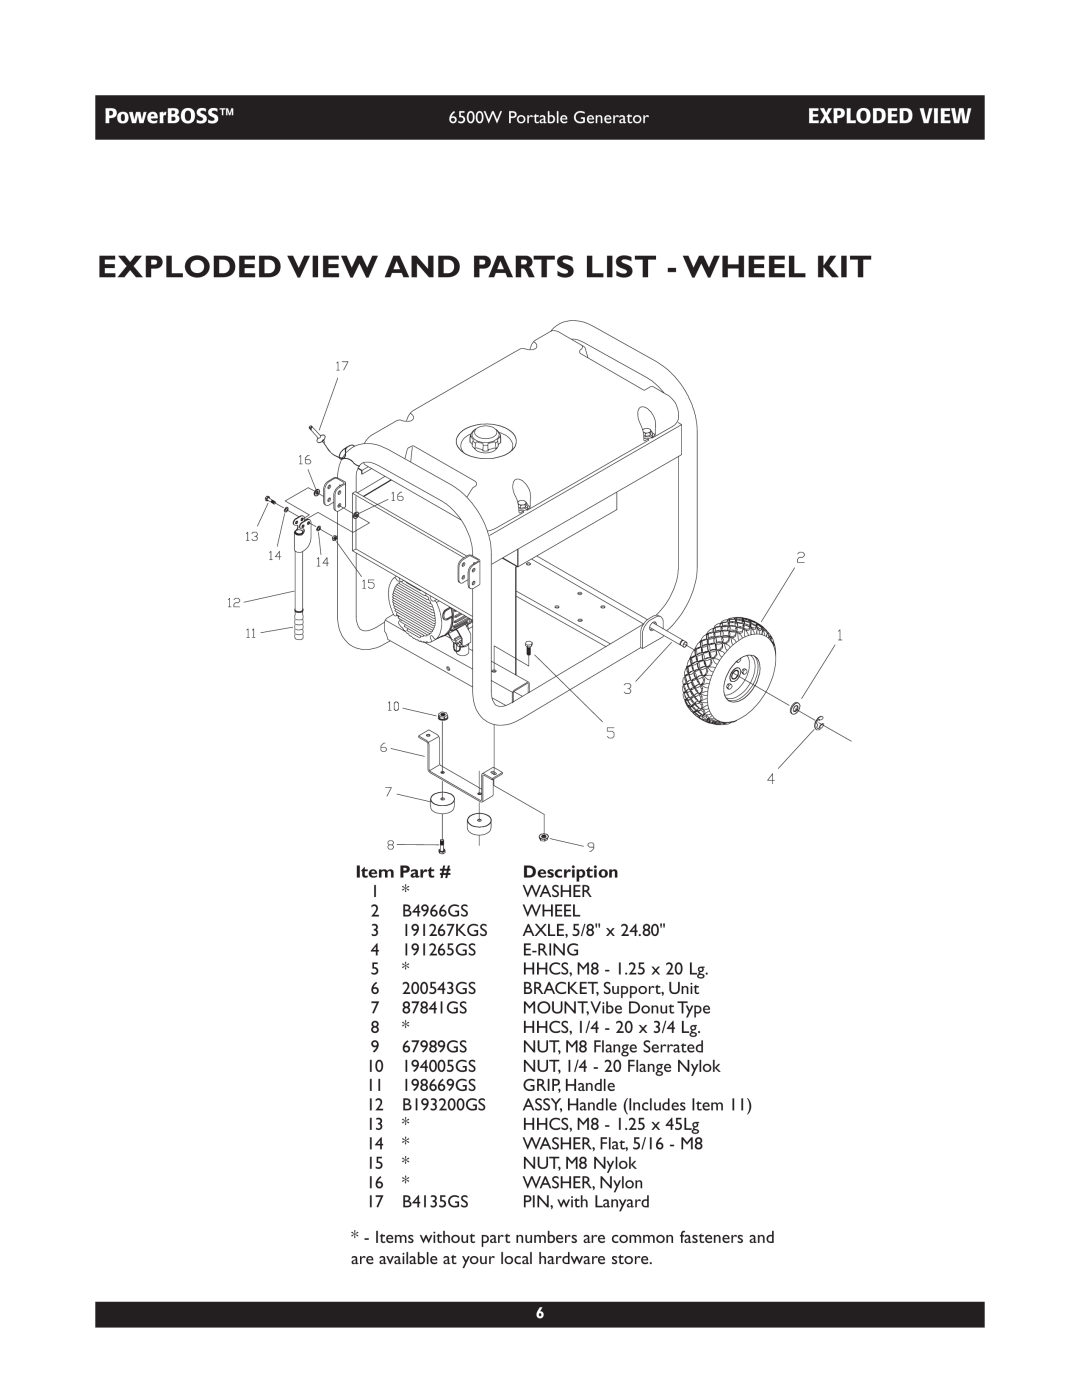 Briggs & Stratton 030227 manual Exploded View And Parts List - Wheel Kit, PowerBOSS, 6500W Portable Generator, Description 